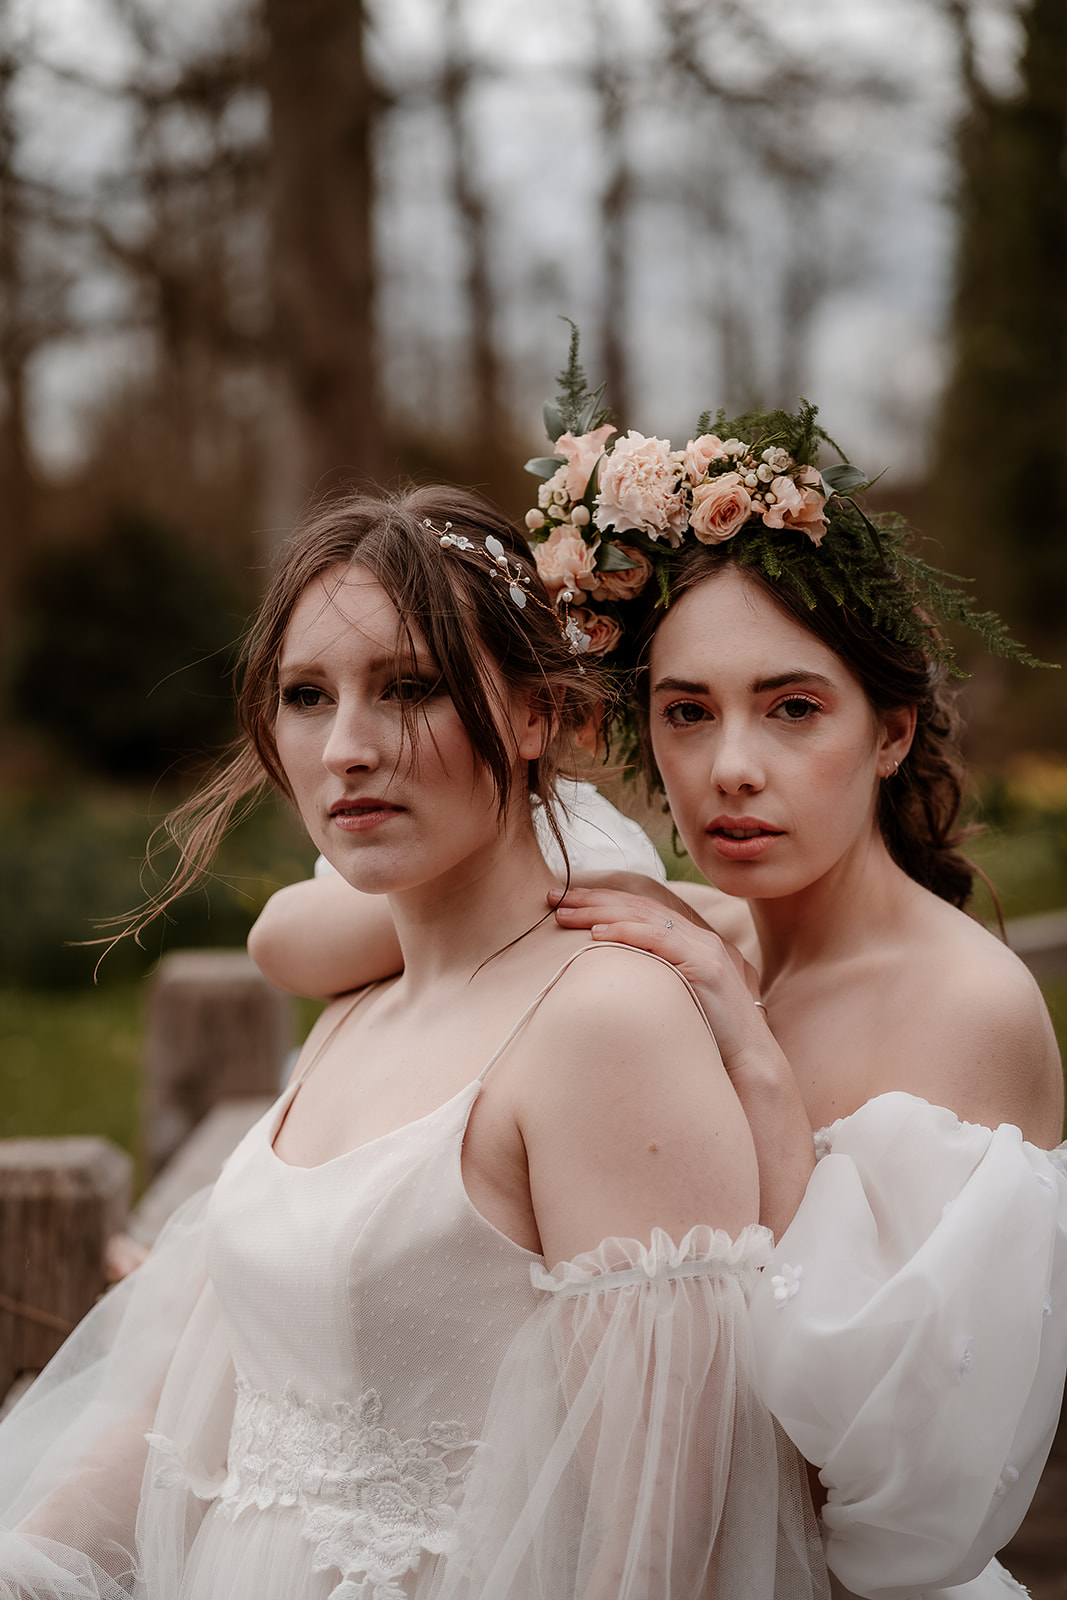 Two brides stand together on a bridge and stare down the camera at Mapledurham House wedding venue